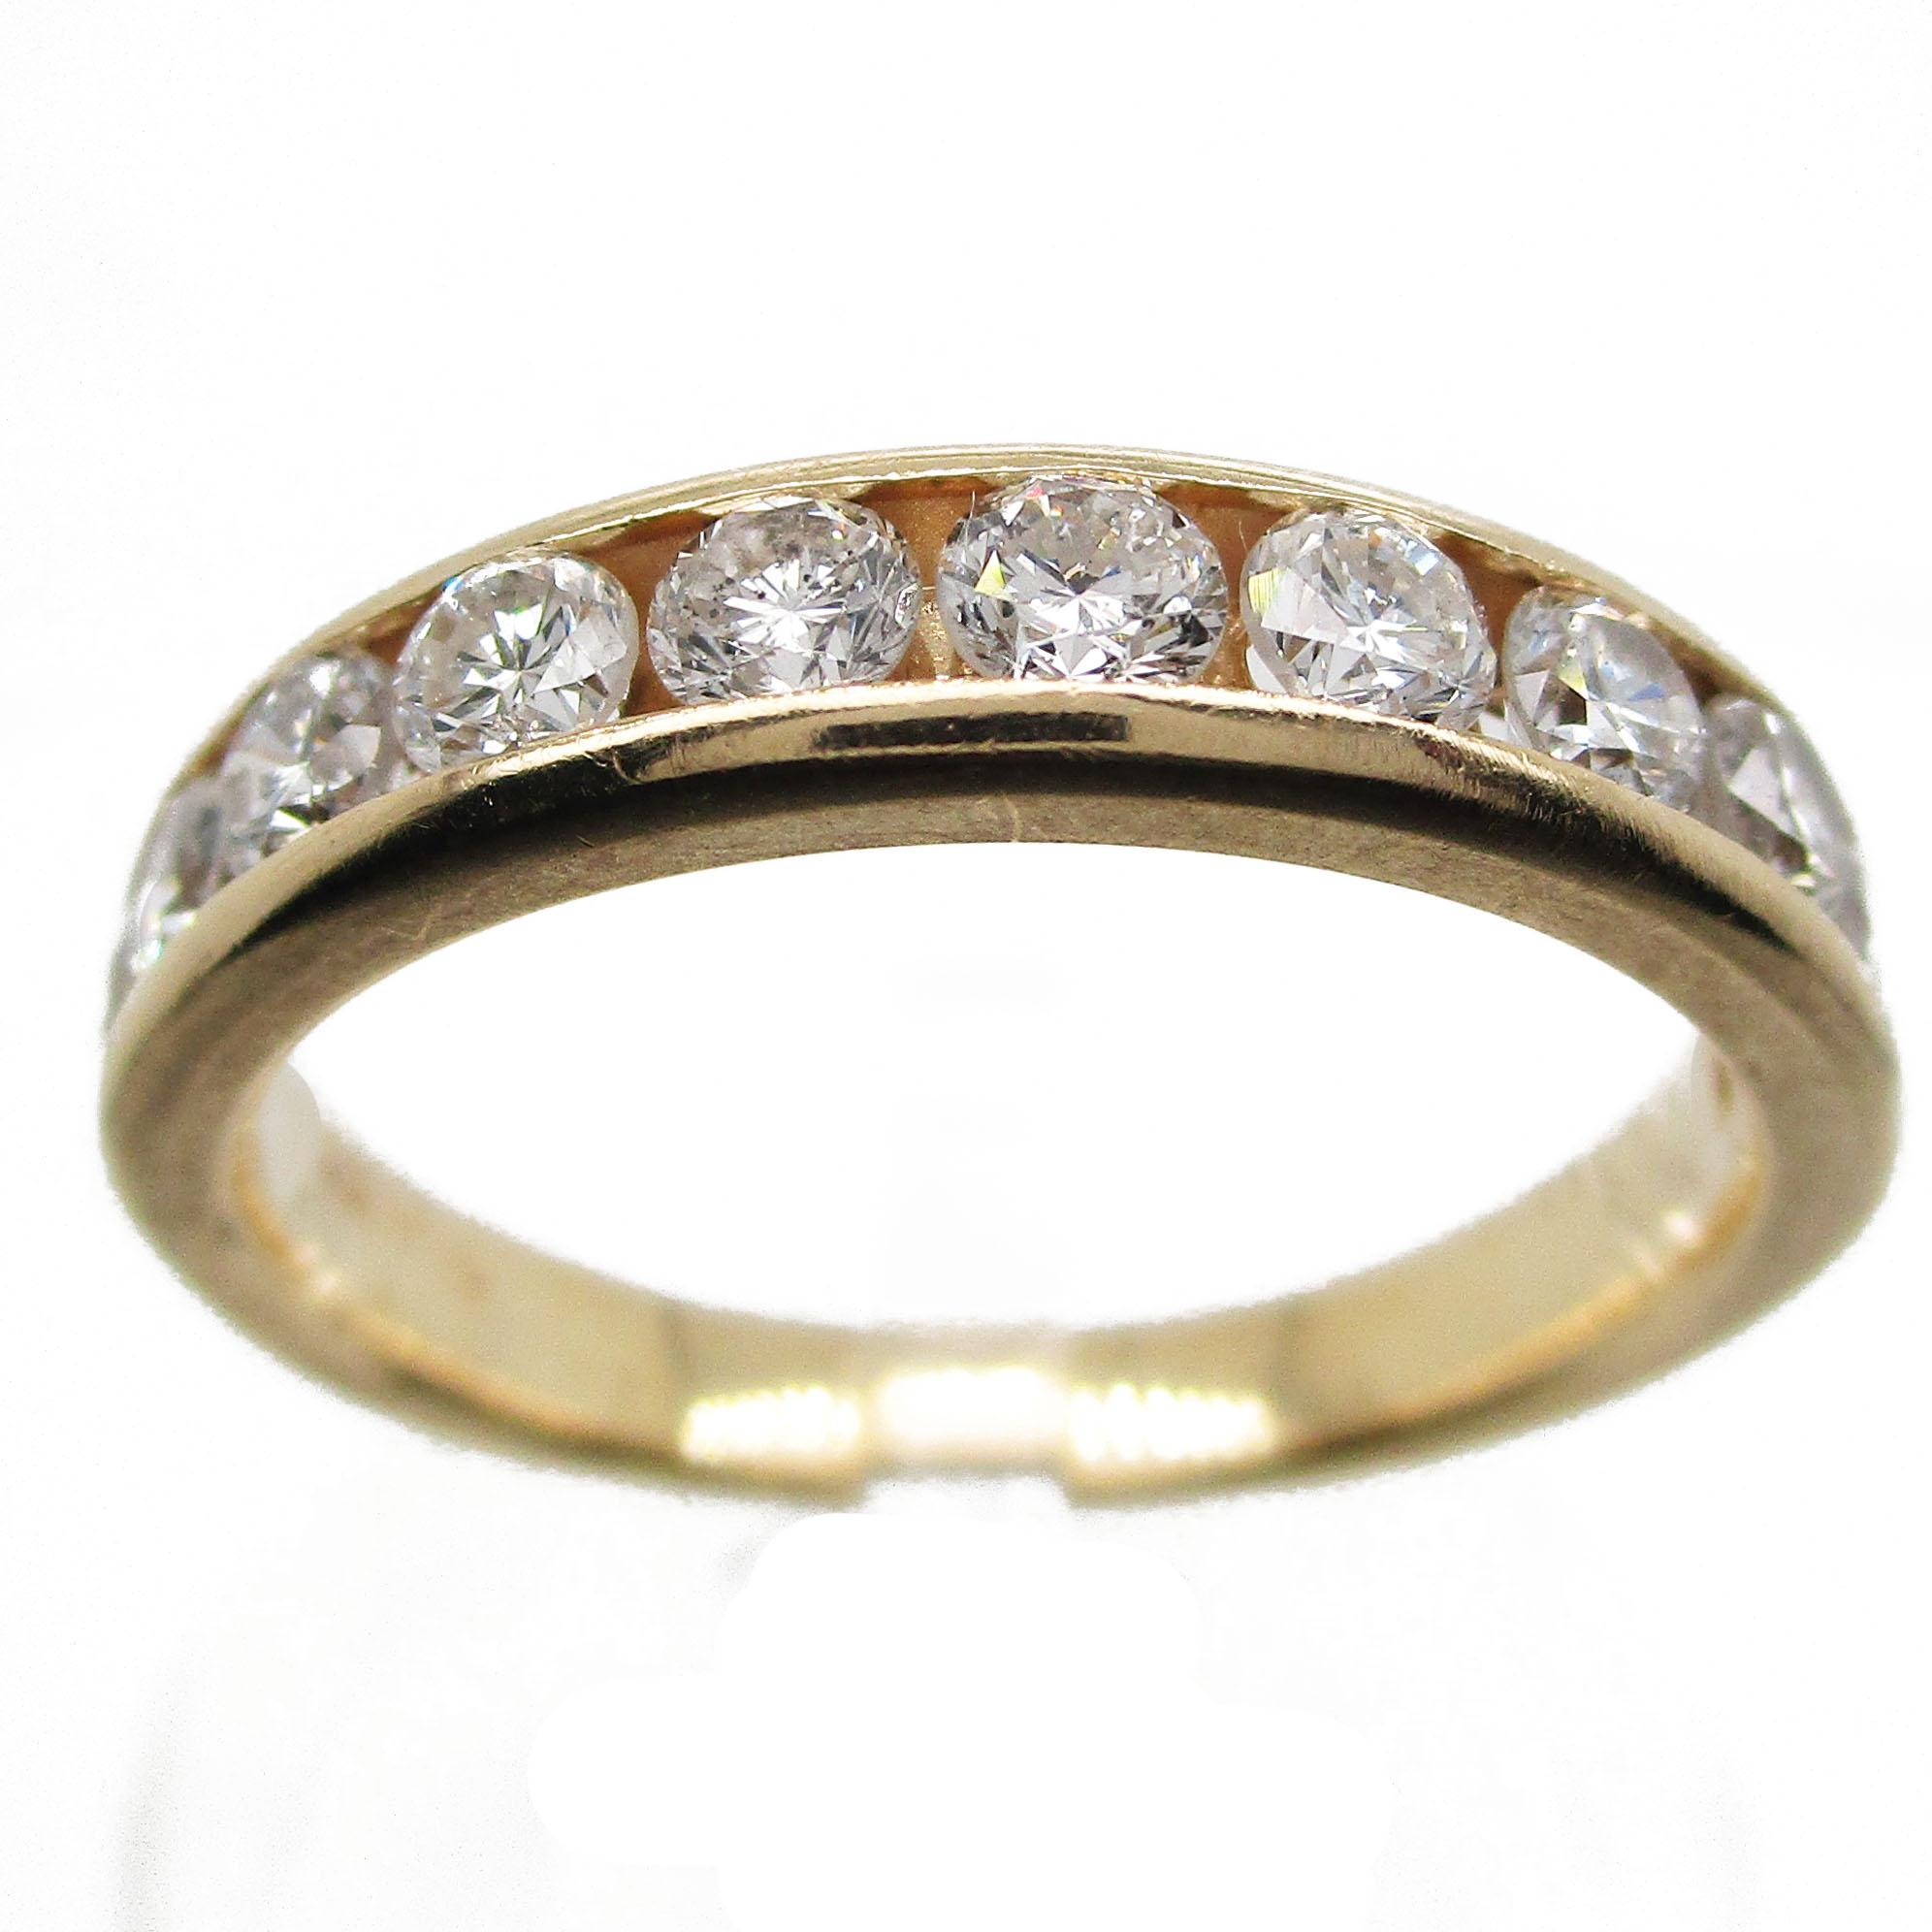 This gorgeous contemporary ring features a brilliant, rich 14 karat yellow gold band and eleven stunning channel set round cut diamonds with a total weight of 1.10 carats. This ring represents phenomenal value! The channel setting of the diamonds